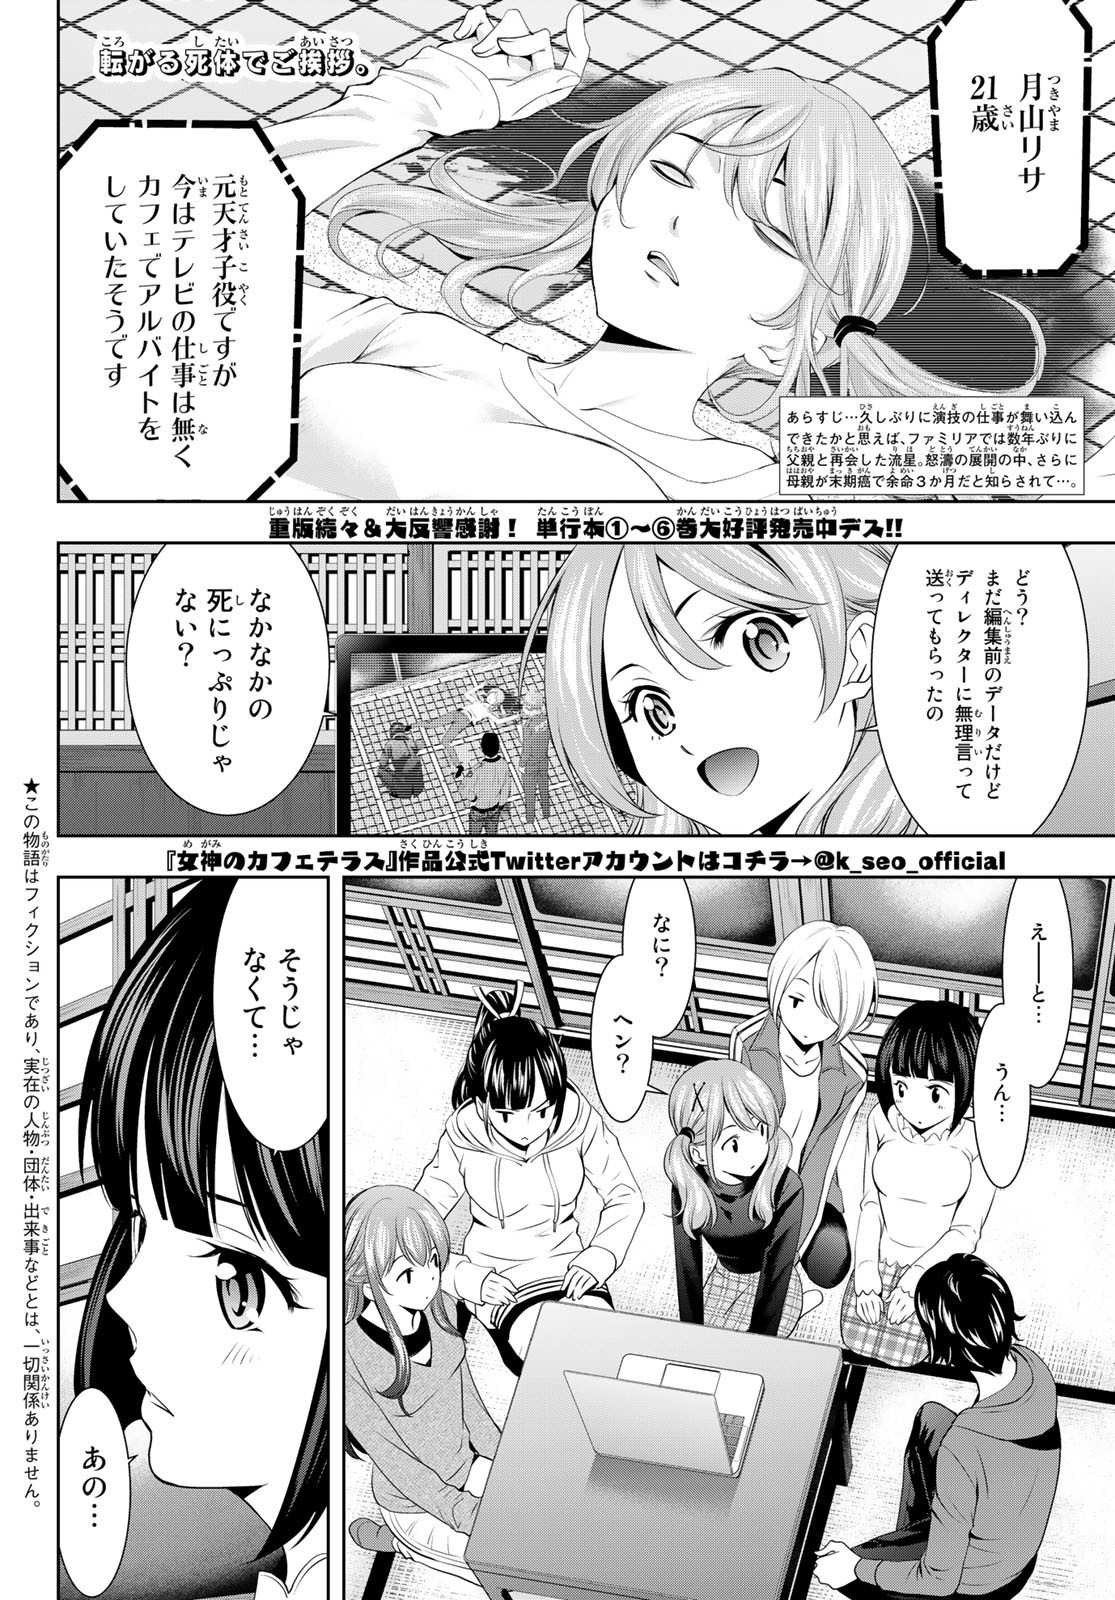 Goddess-Cafe-Terrace - Chapter 072 - Page 2